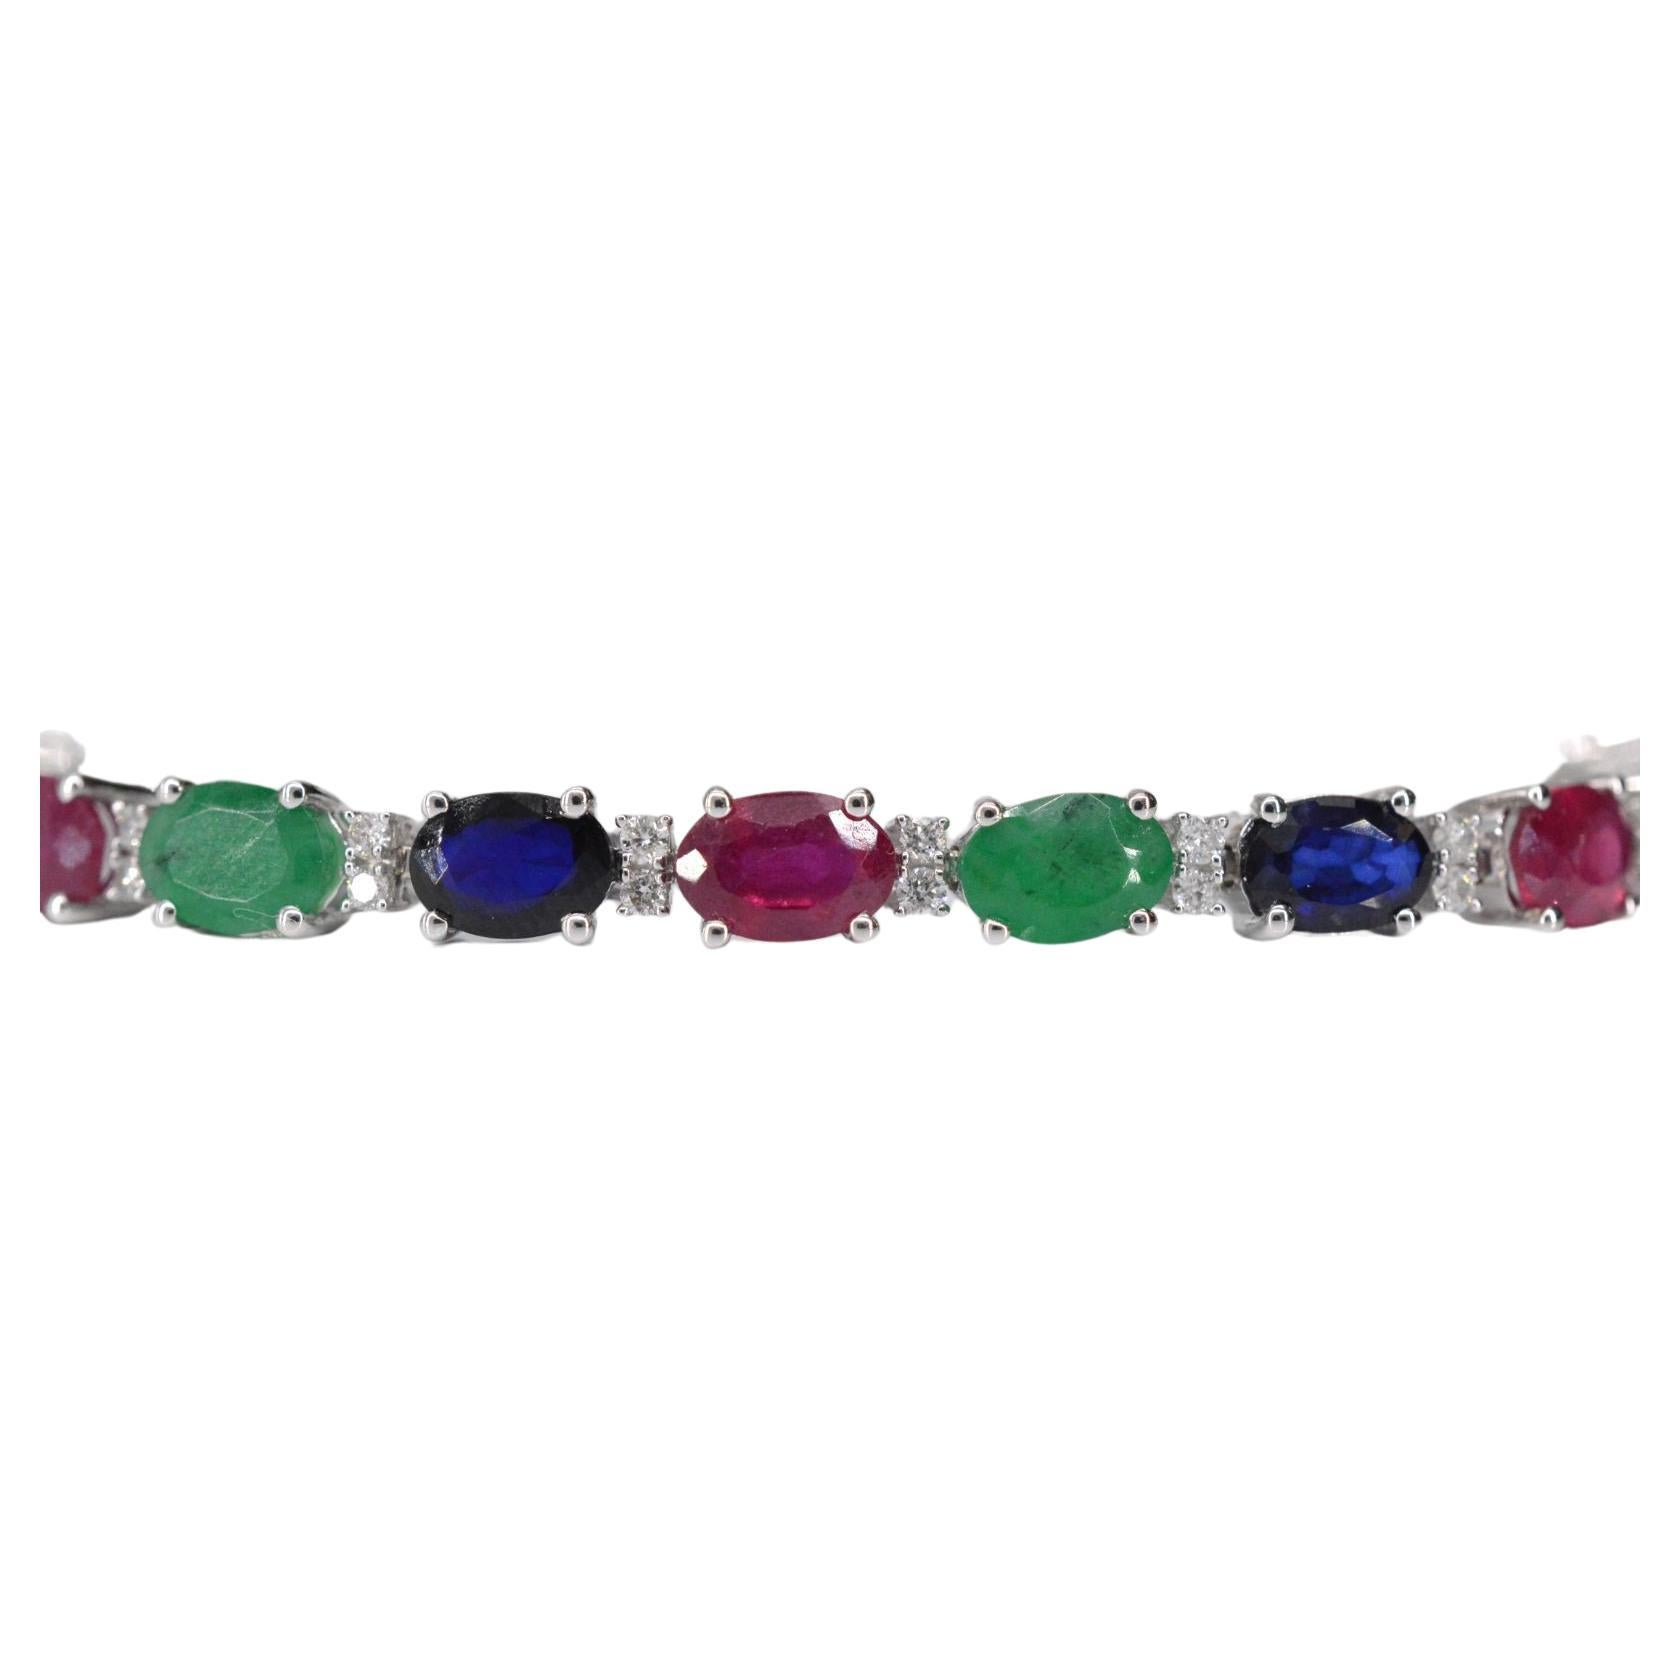 Introducing a remarkable bracelet that combines the sparkle of diamonds with the vivid hues of three exquisite gemstones. This elegant piece features 0.50 carats of brilliant-cut diamonds with a color grading of F-G, a clarity range of SI-P, and